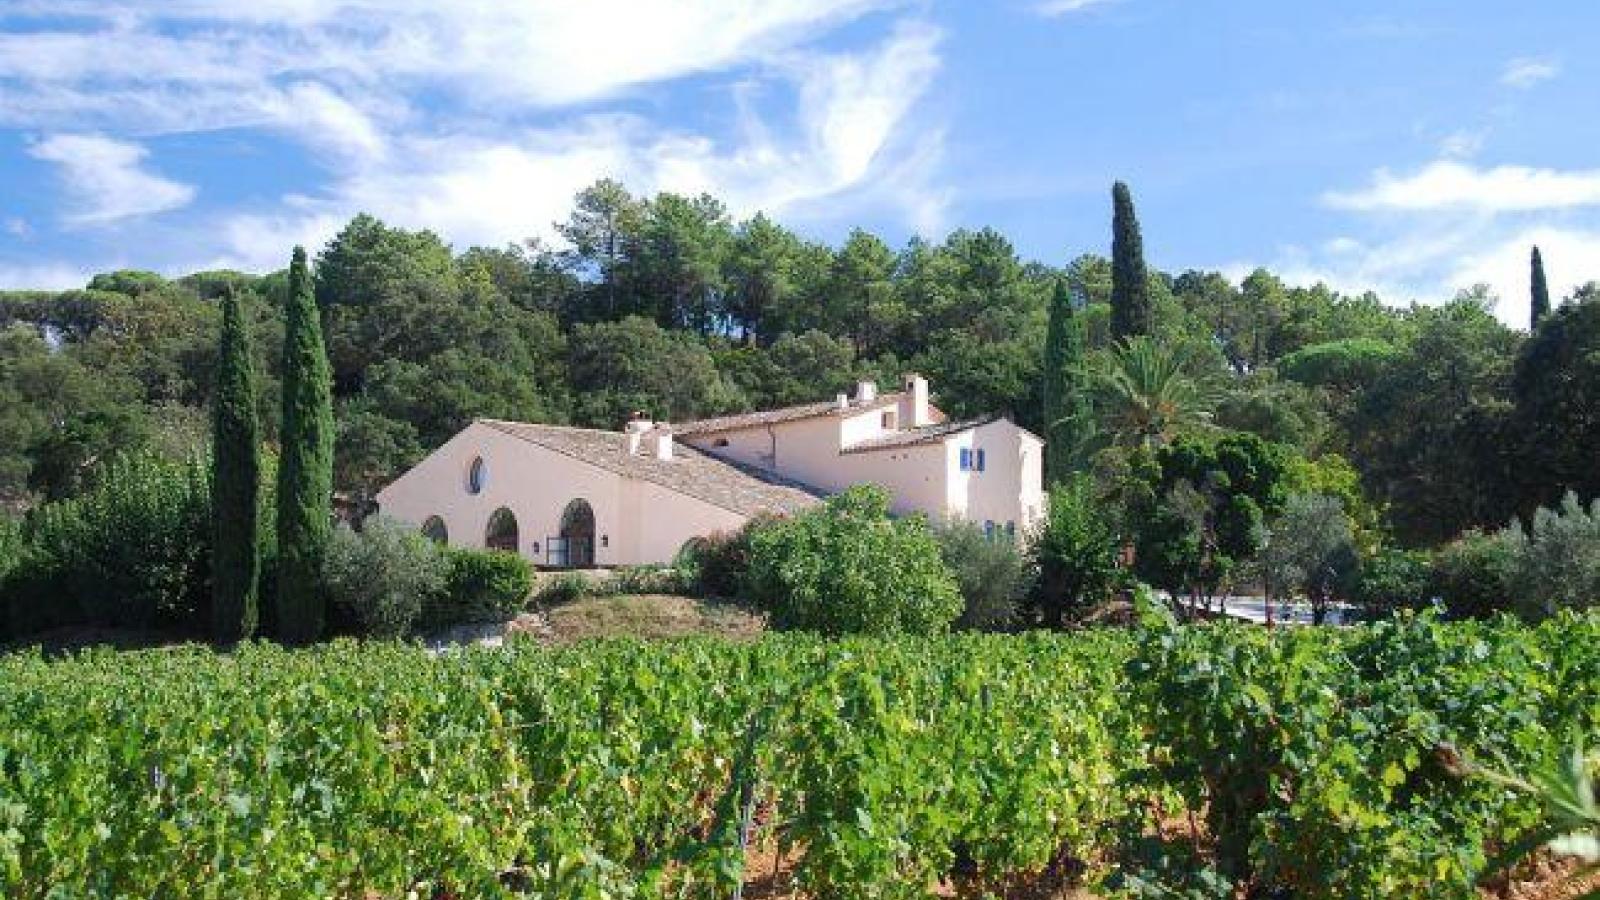 The vineyards of Saint-Tropez , flagship of the French Riviera